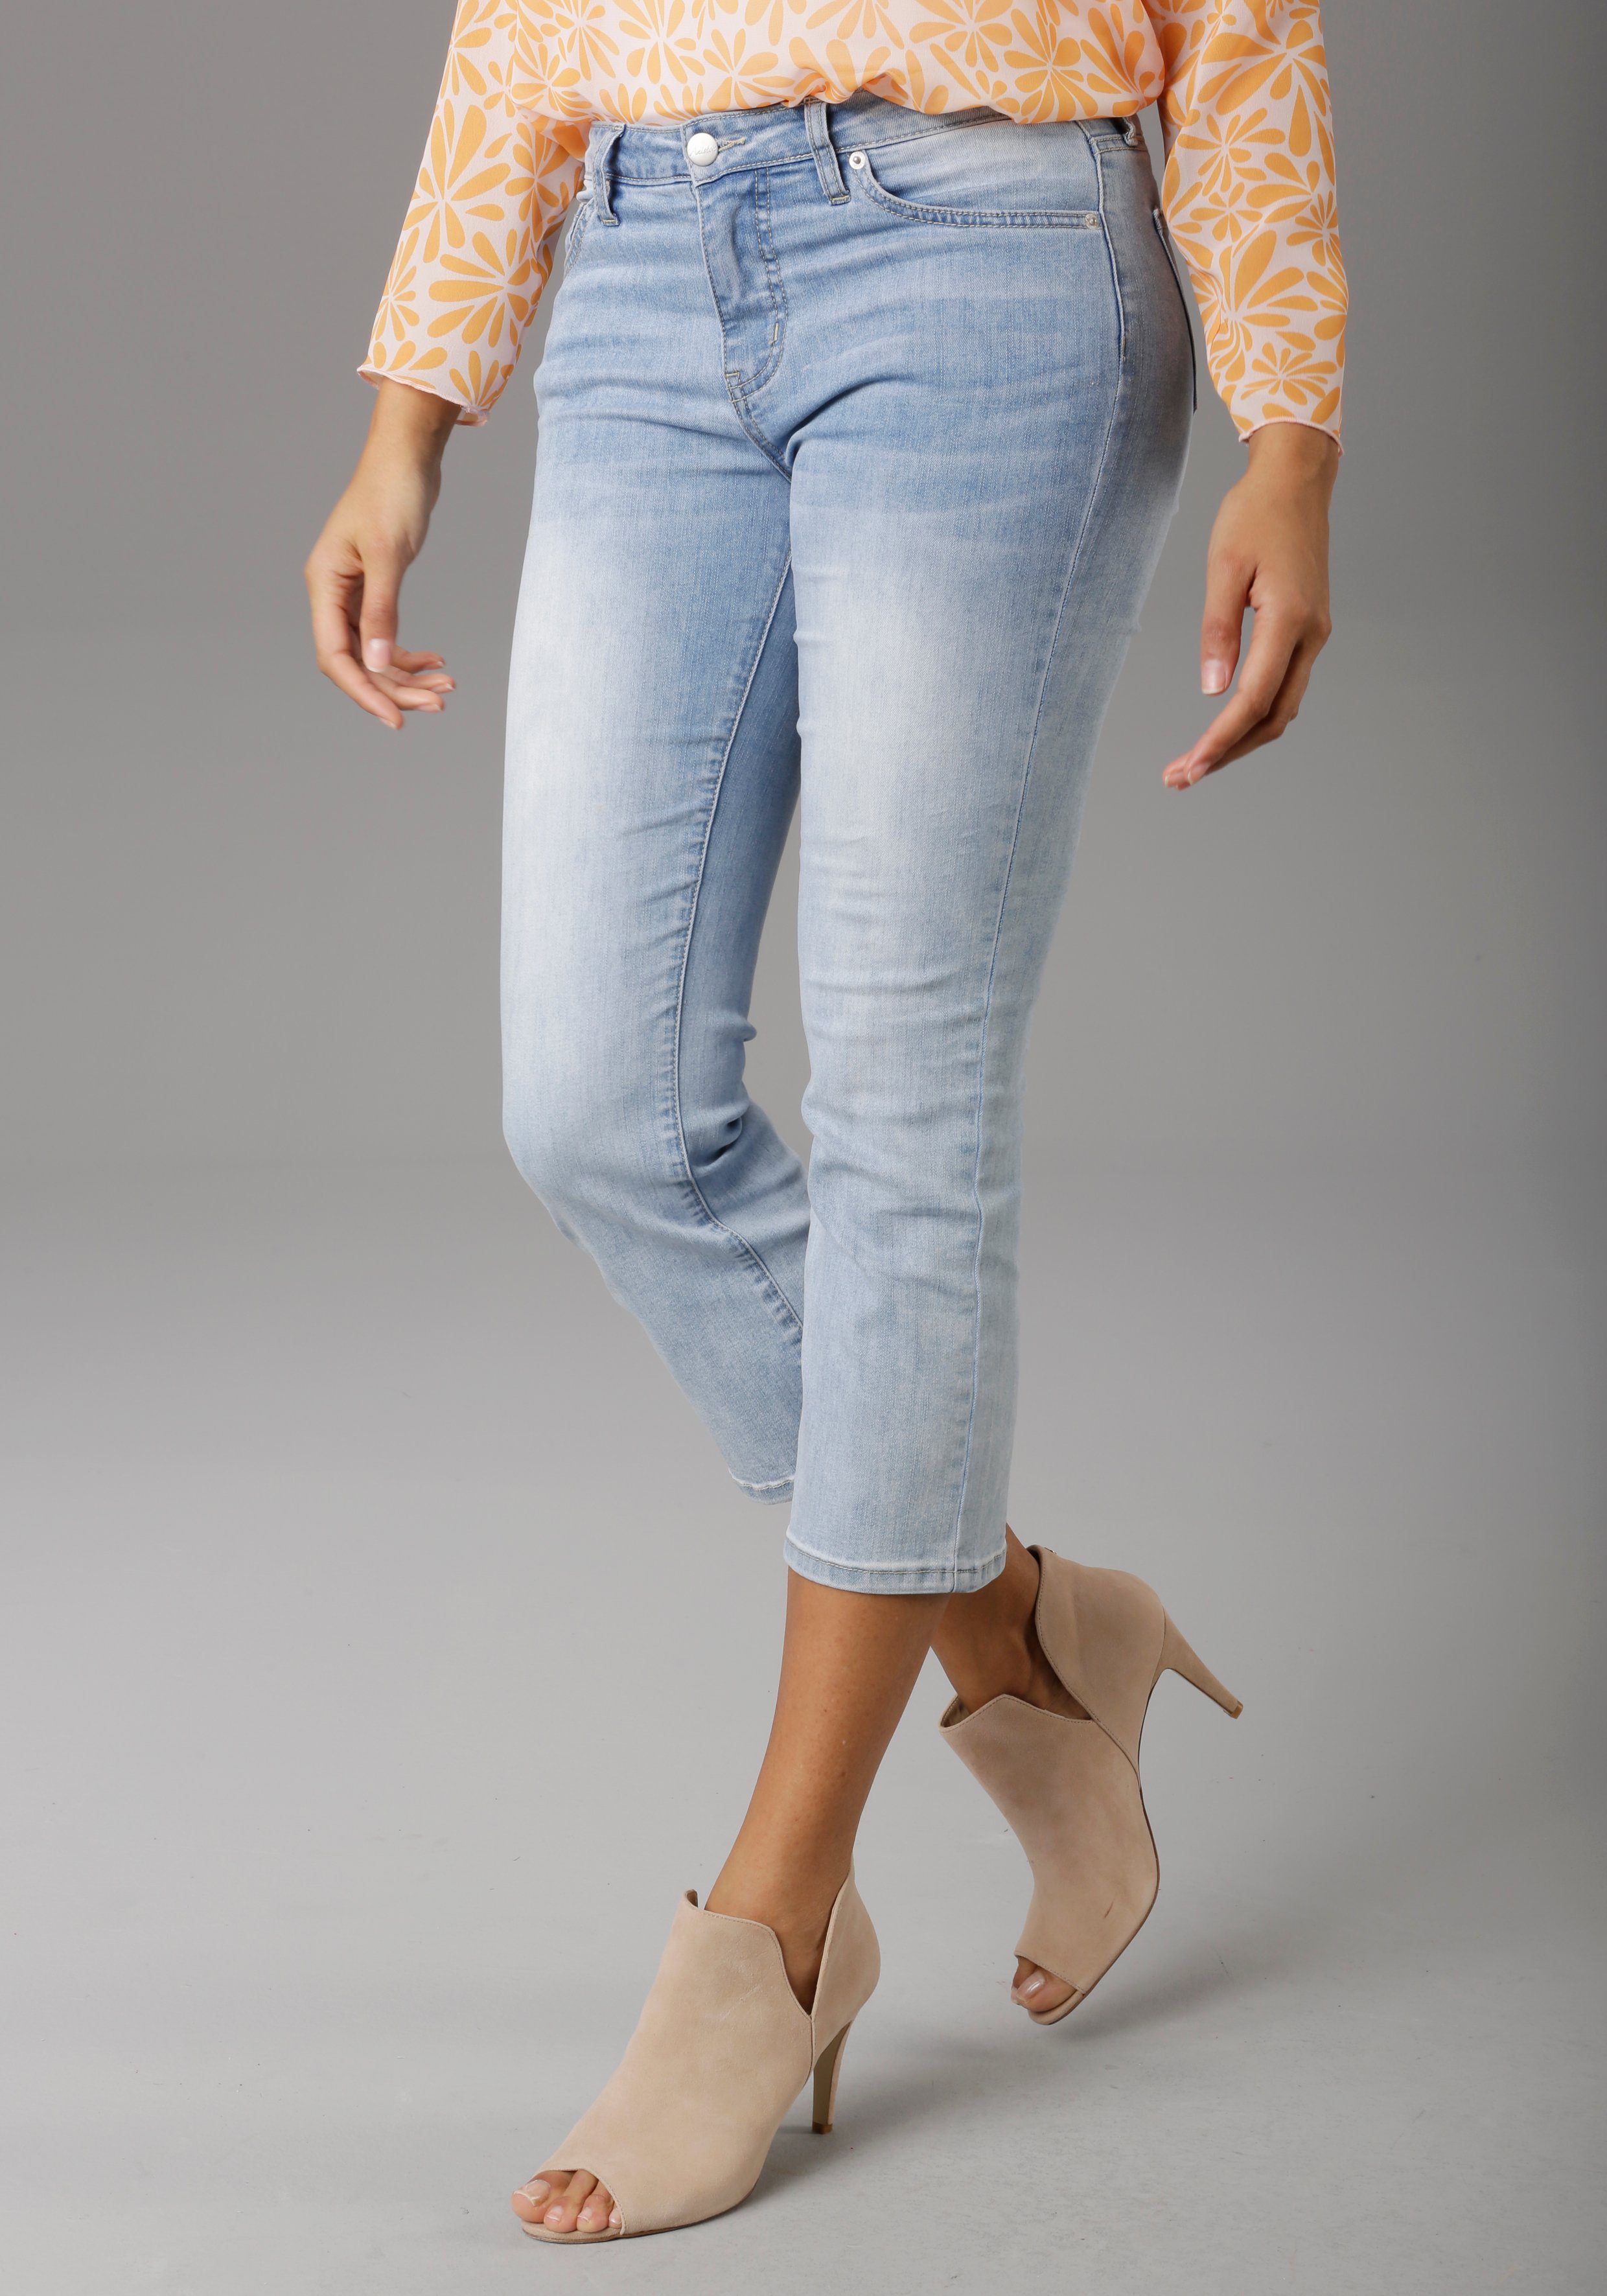 SELECTED Länge Aniston Straight-Jeans in cropped verkürzter light-blue-washed